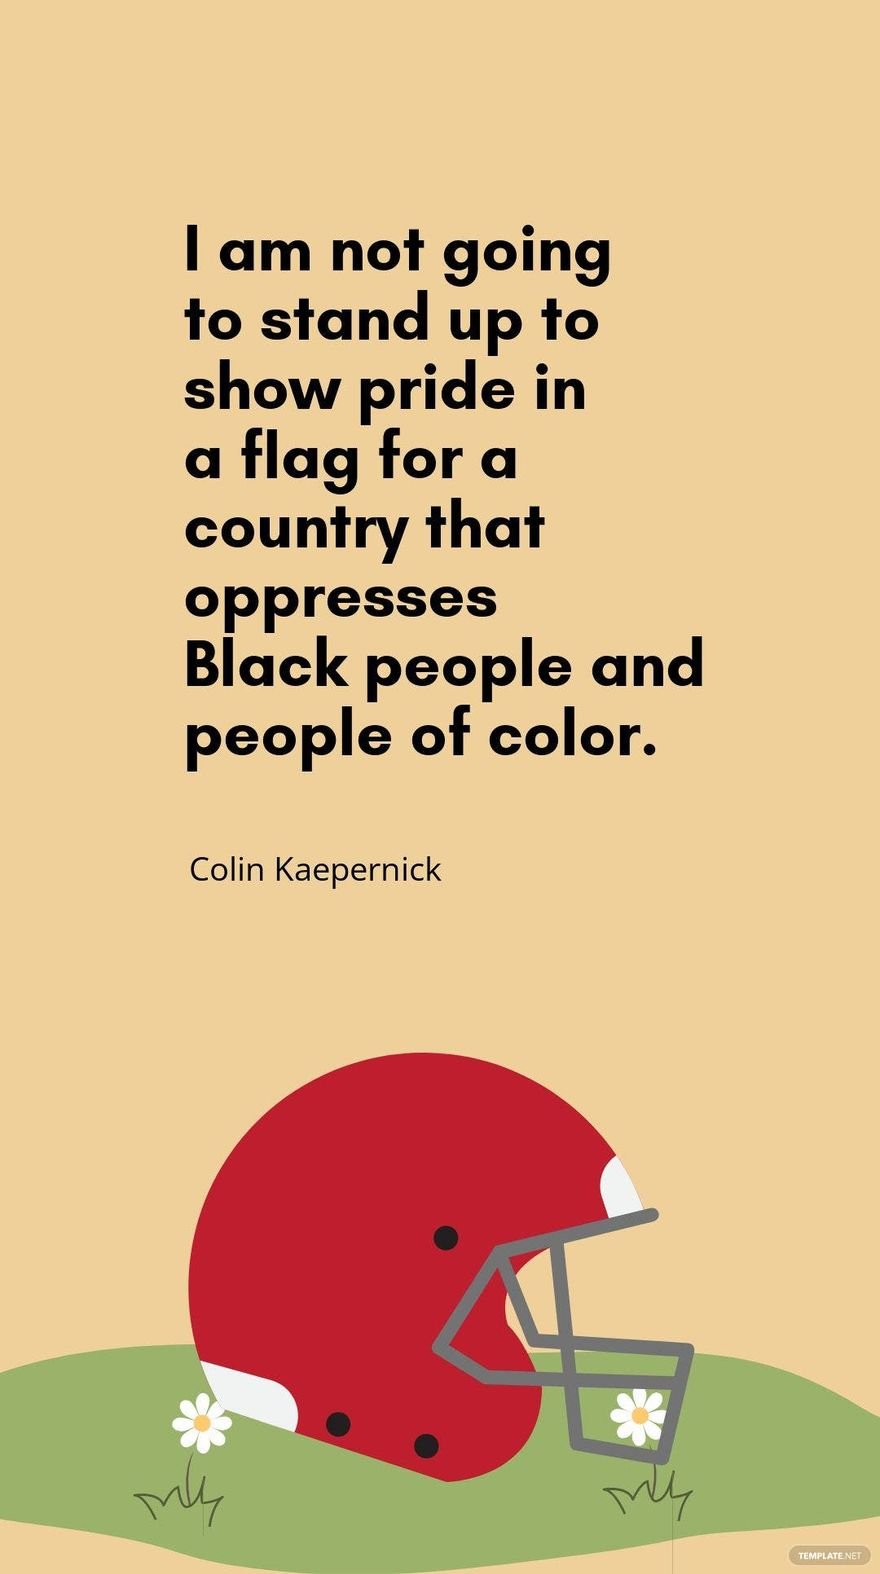 Colin Kaepernick - I am not going to stand up to show pride in a flag for a country that oppresses Black people and people of color.